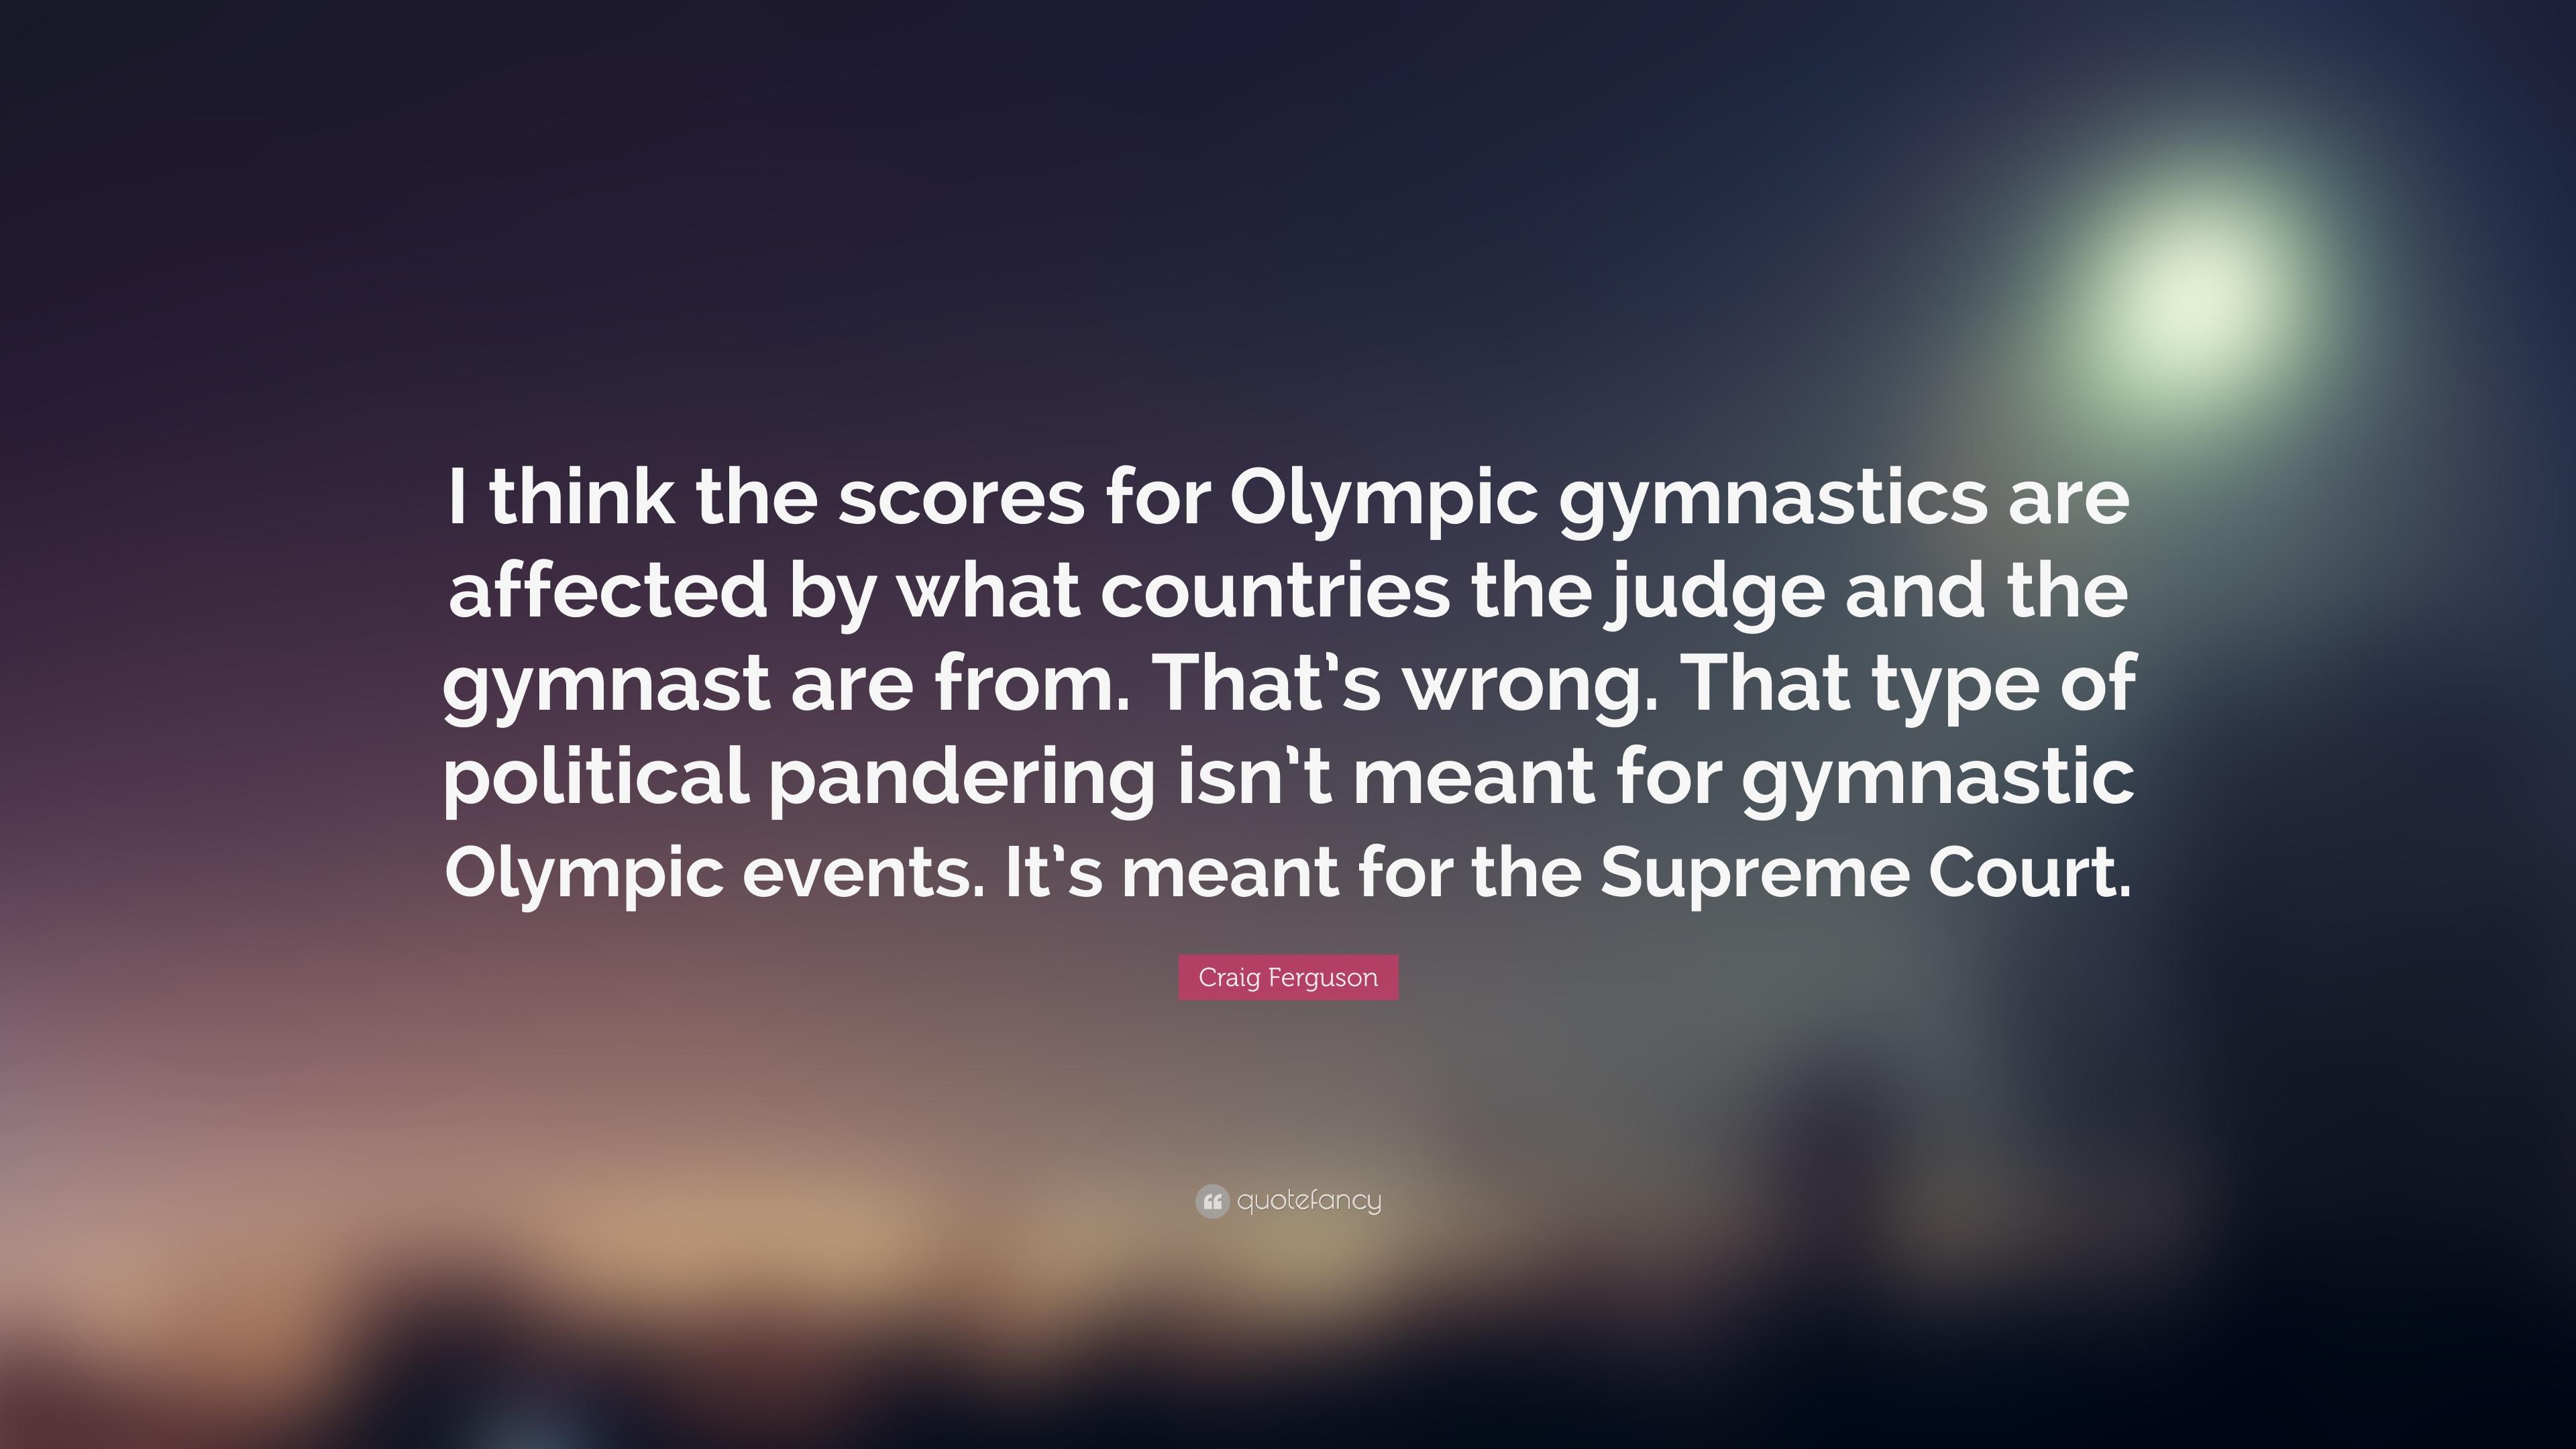 Craig Ferguson Quote: “I think the scores for Olympic gymnastics are